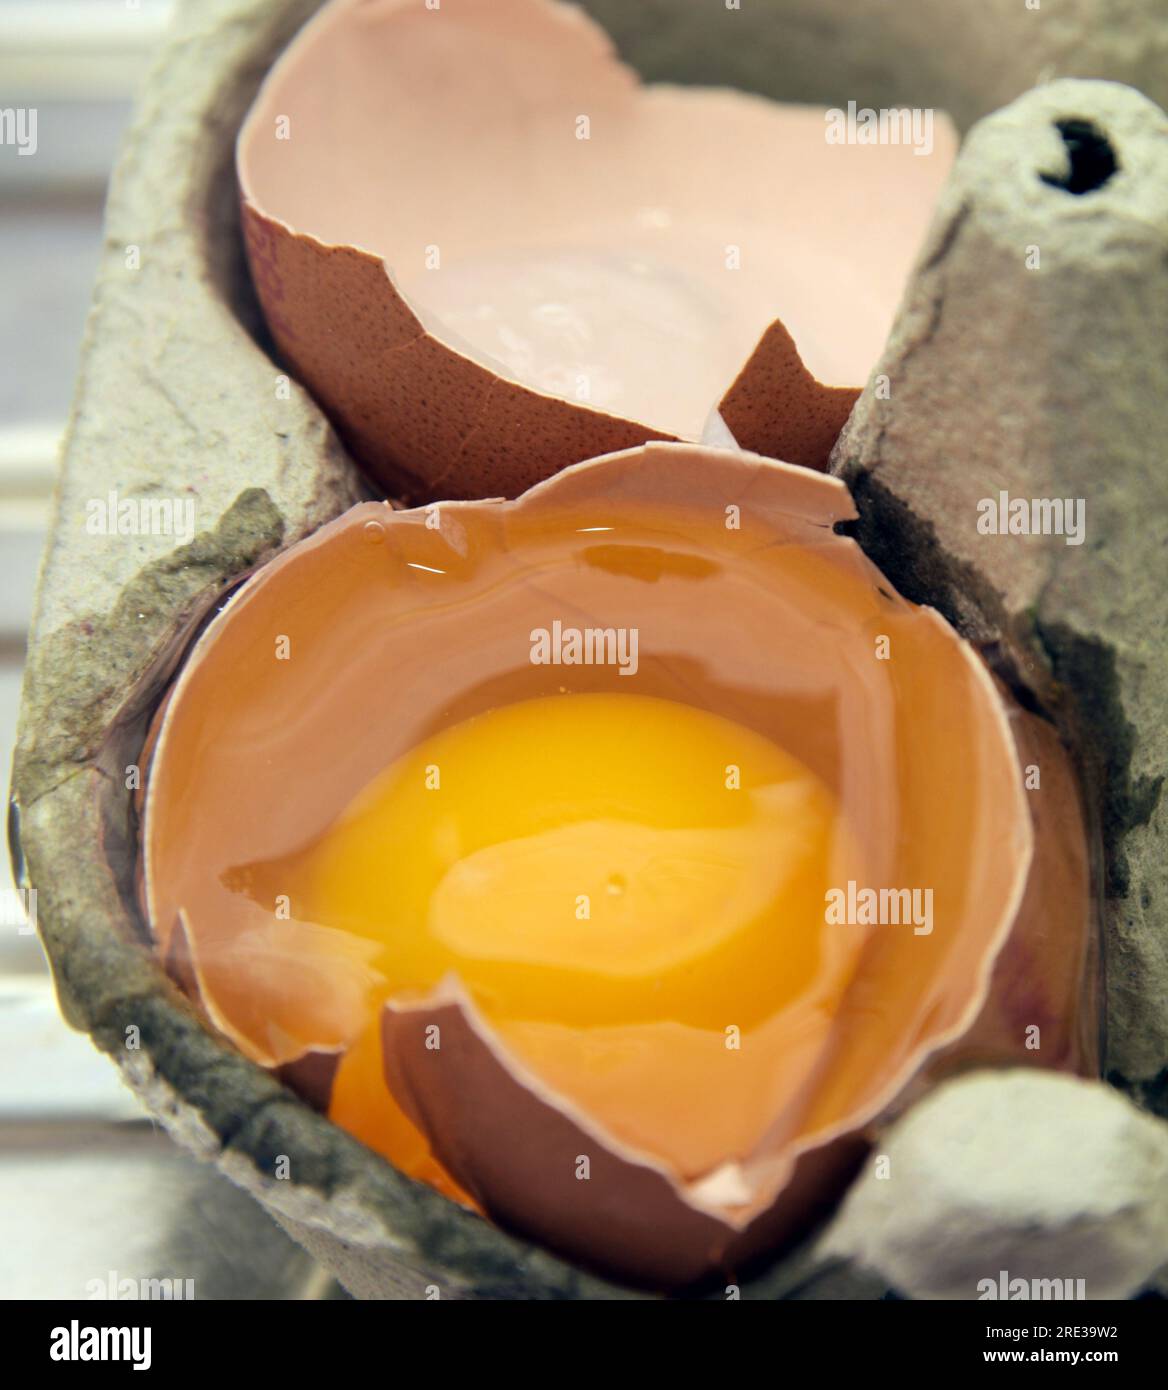 Yolk and white of a broken egg in its half shell with rest of shell next to it, sat in a cardboard eggs carton, close up Stock Photo